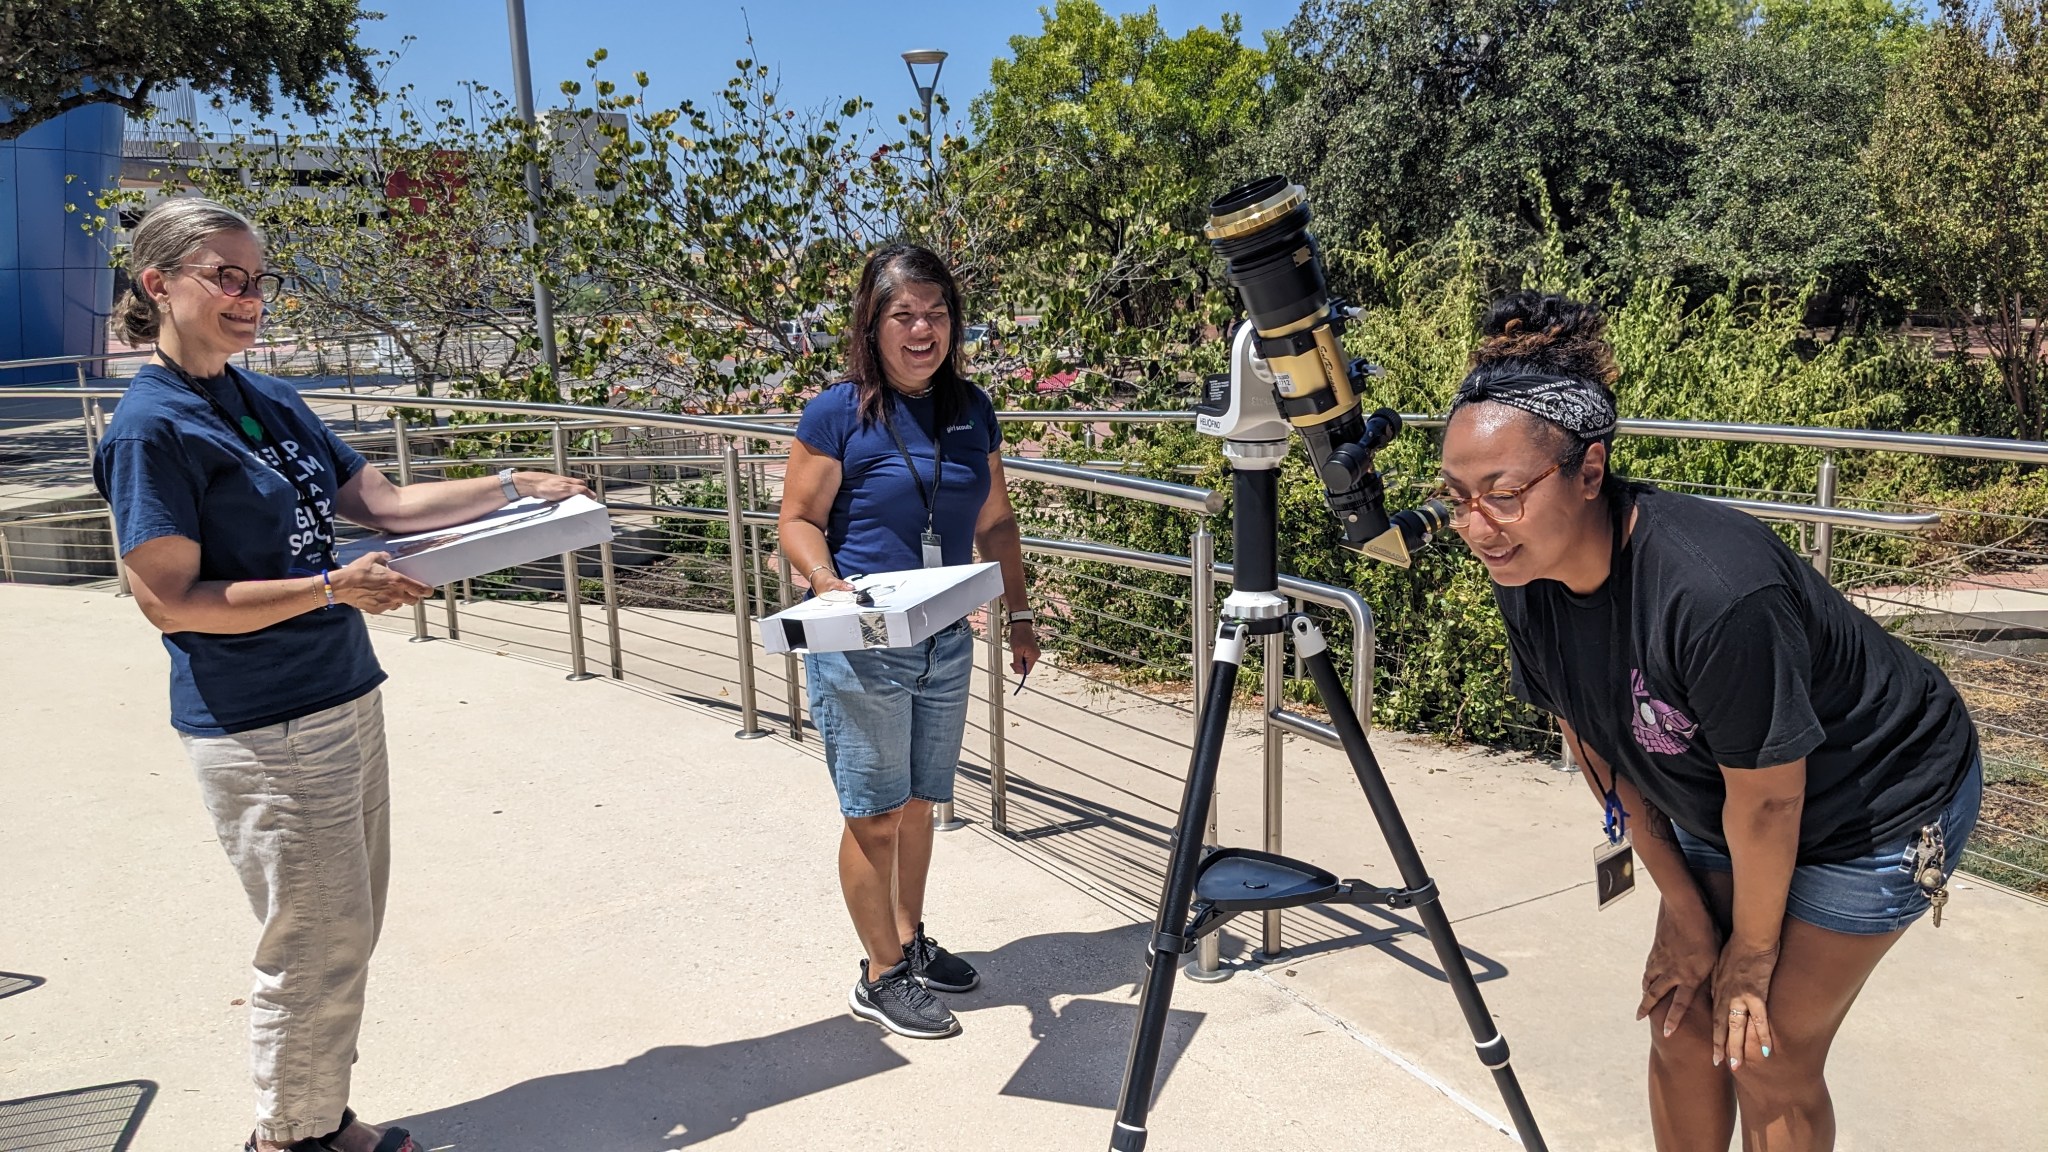 Two people watch as a third looks into a telescope